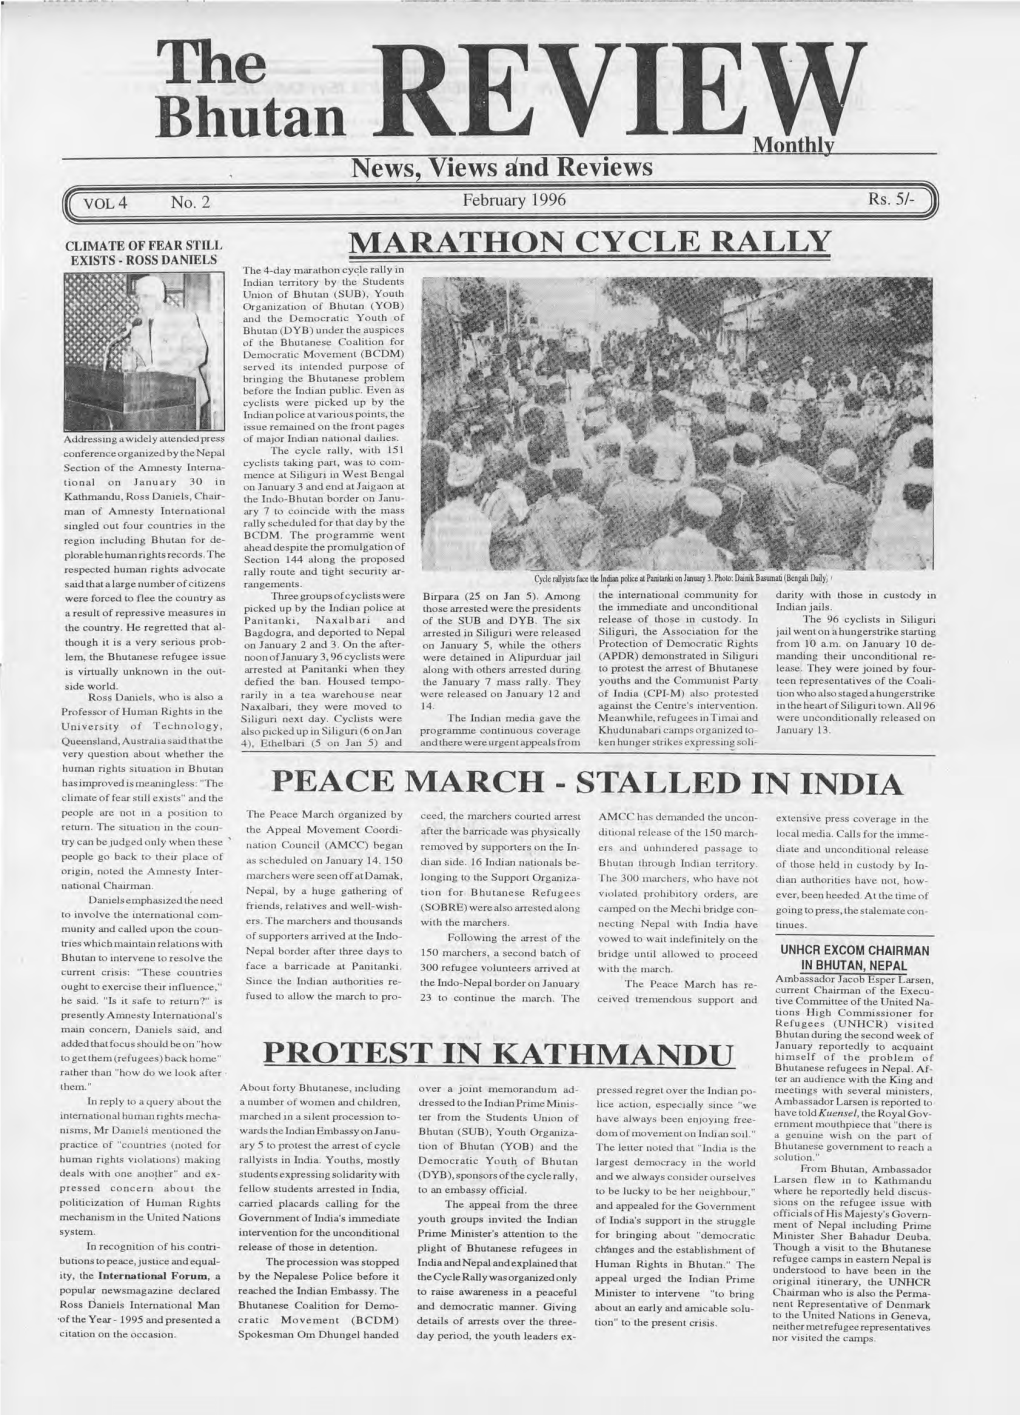 The Bhutan Review Page Two